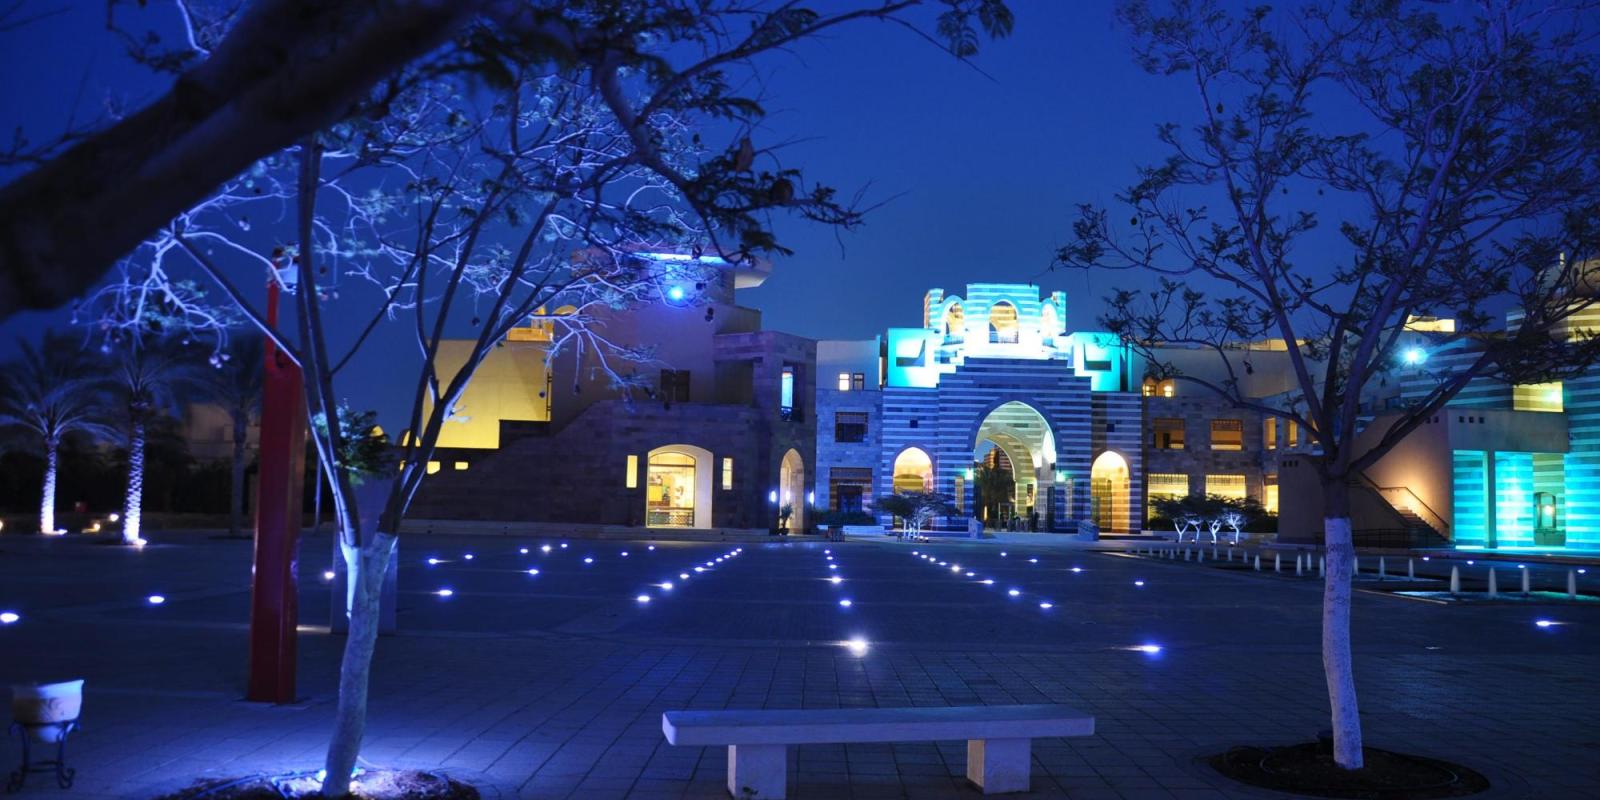 Every year the AUC portal lights up blue for World Autism Awareness Day